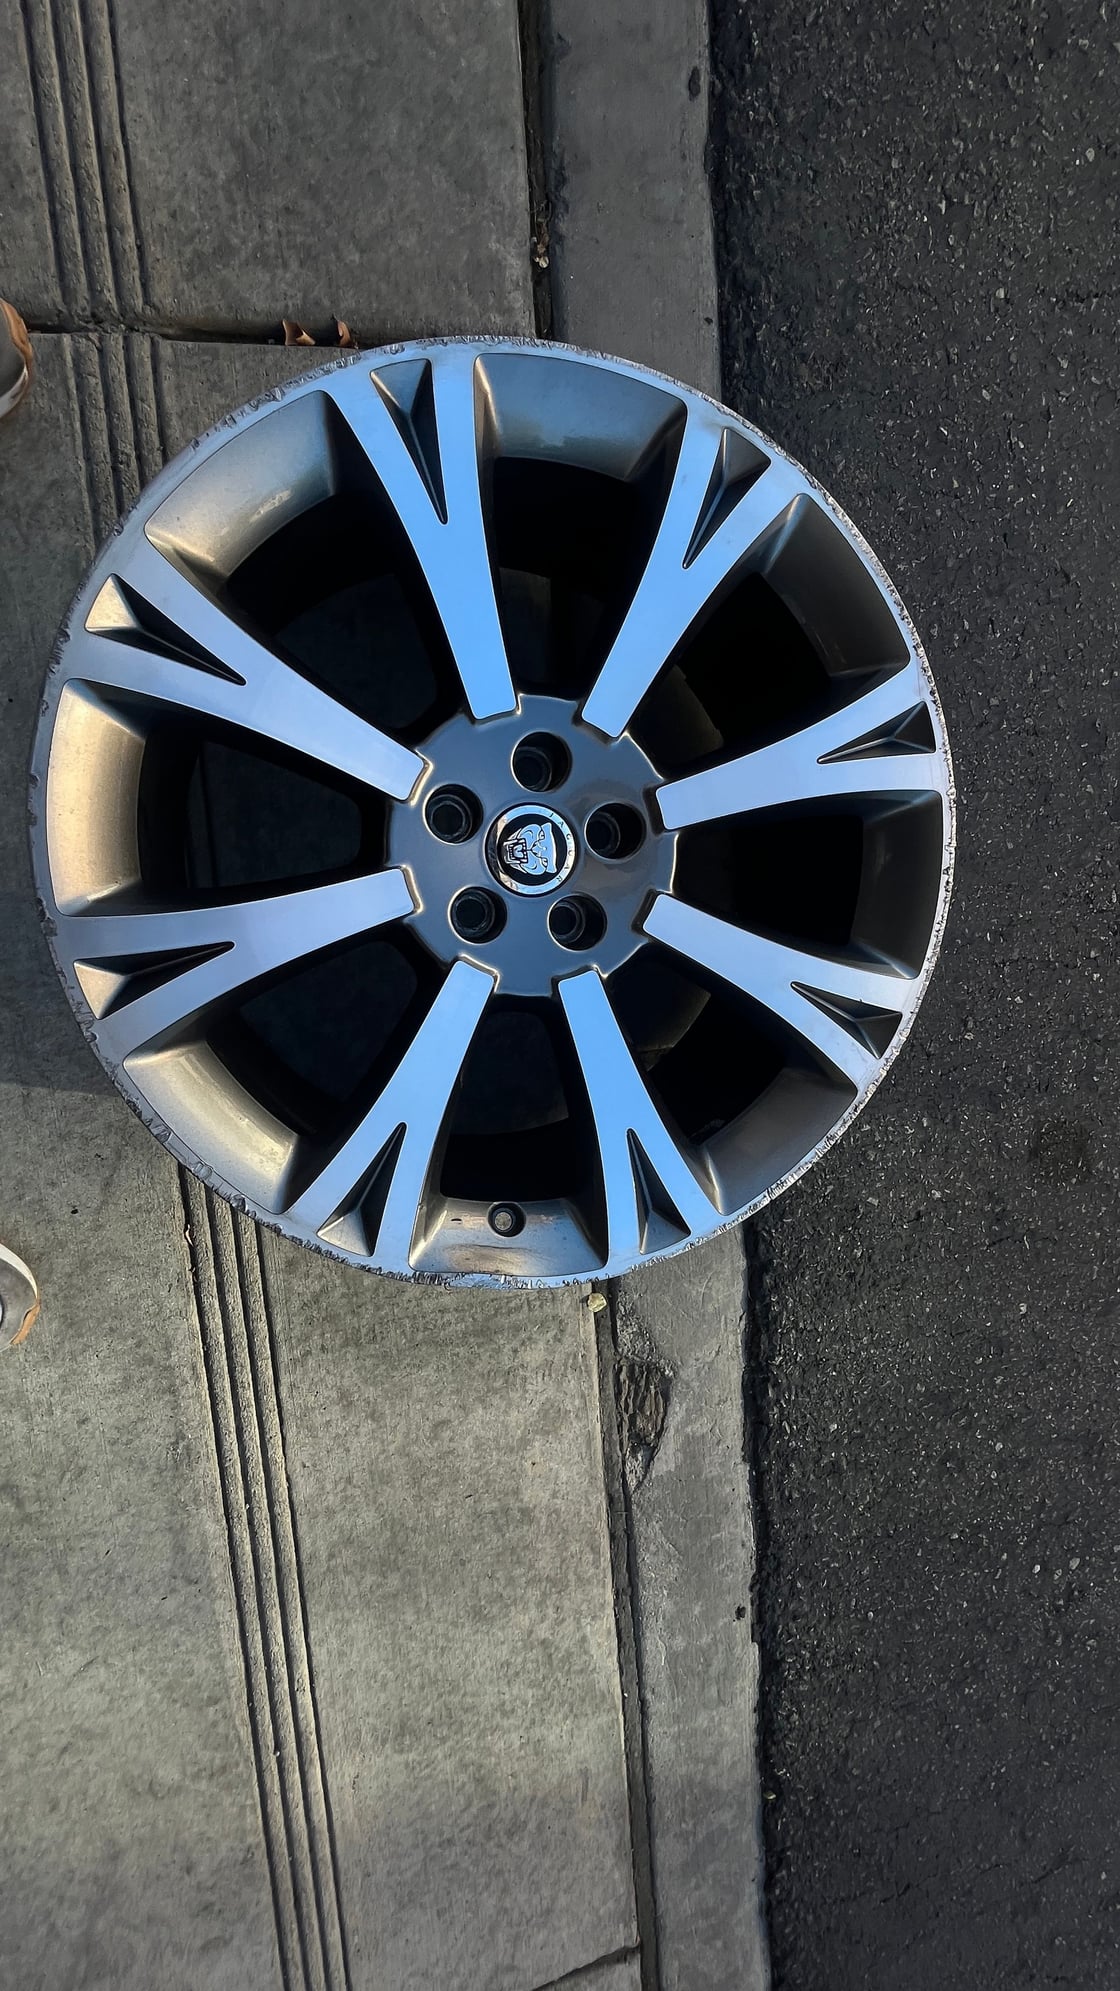 Wheels and Tires/Axles - Project Orona! - Used - 2010 to 2019 Jaguar XJ - 2014 to 2023 Jaguar F-Type - North La County, CA 91354, United States